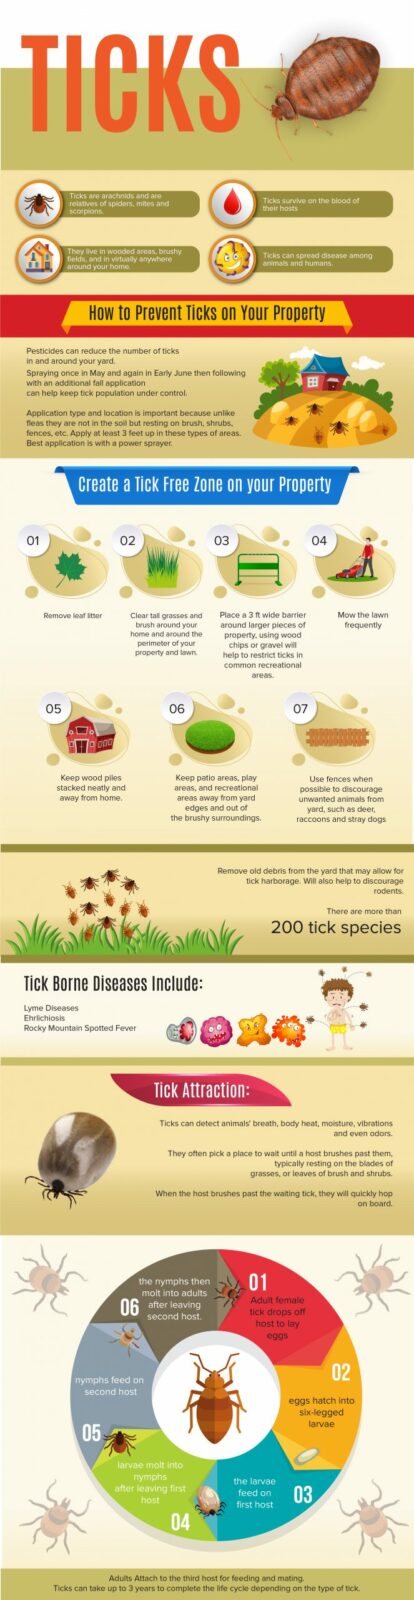 Facts About Ticks